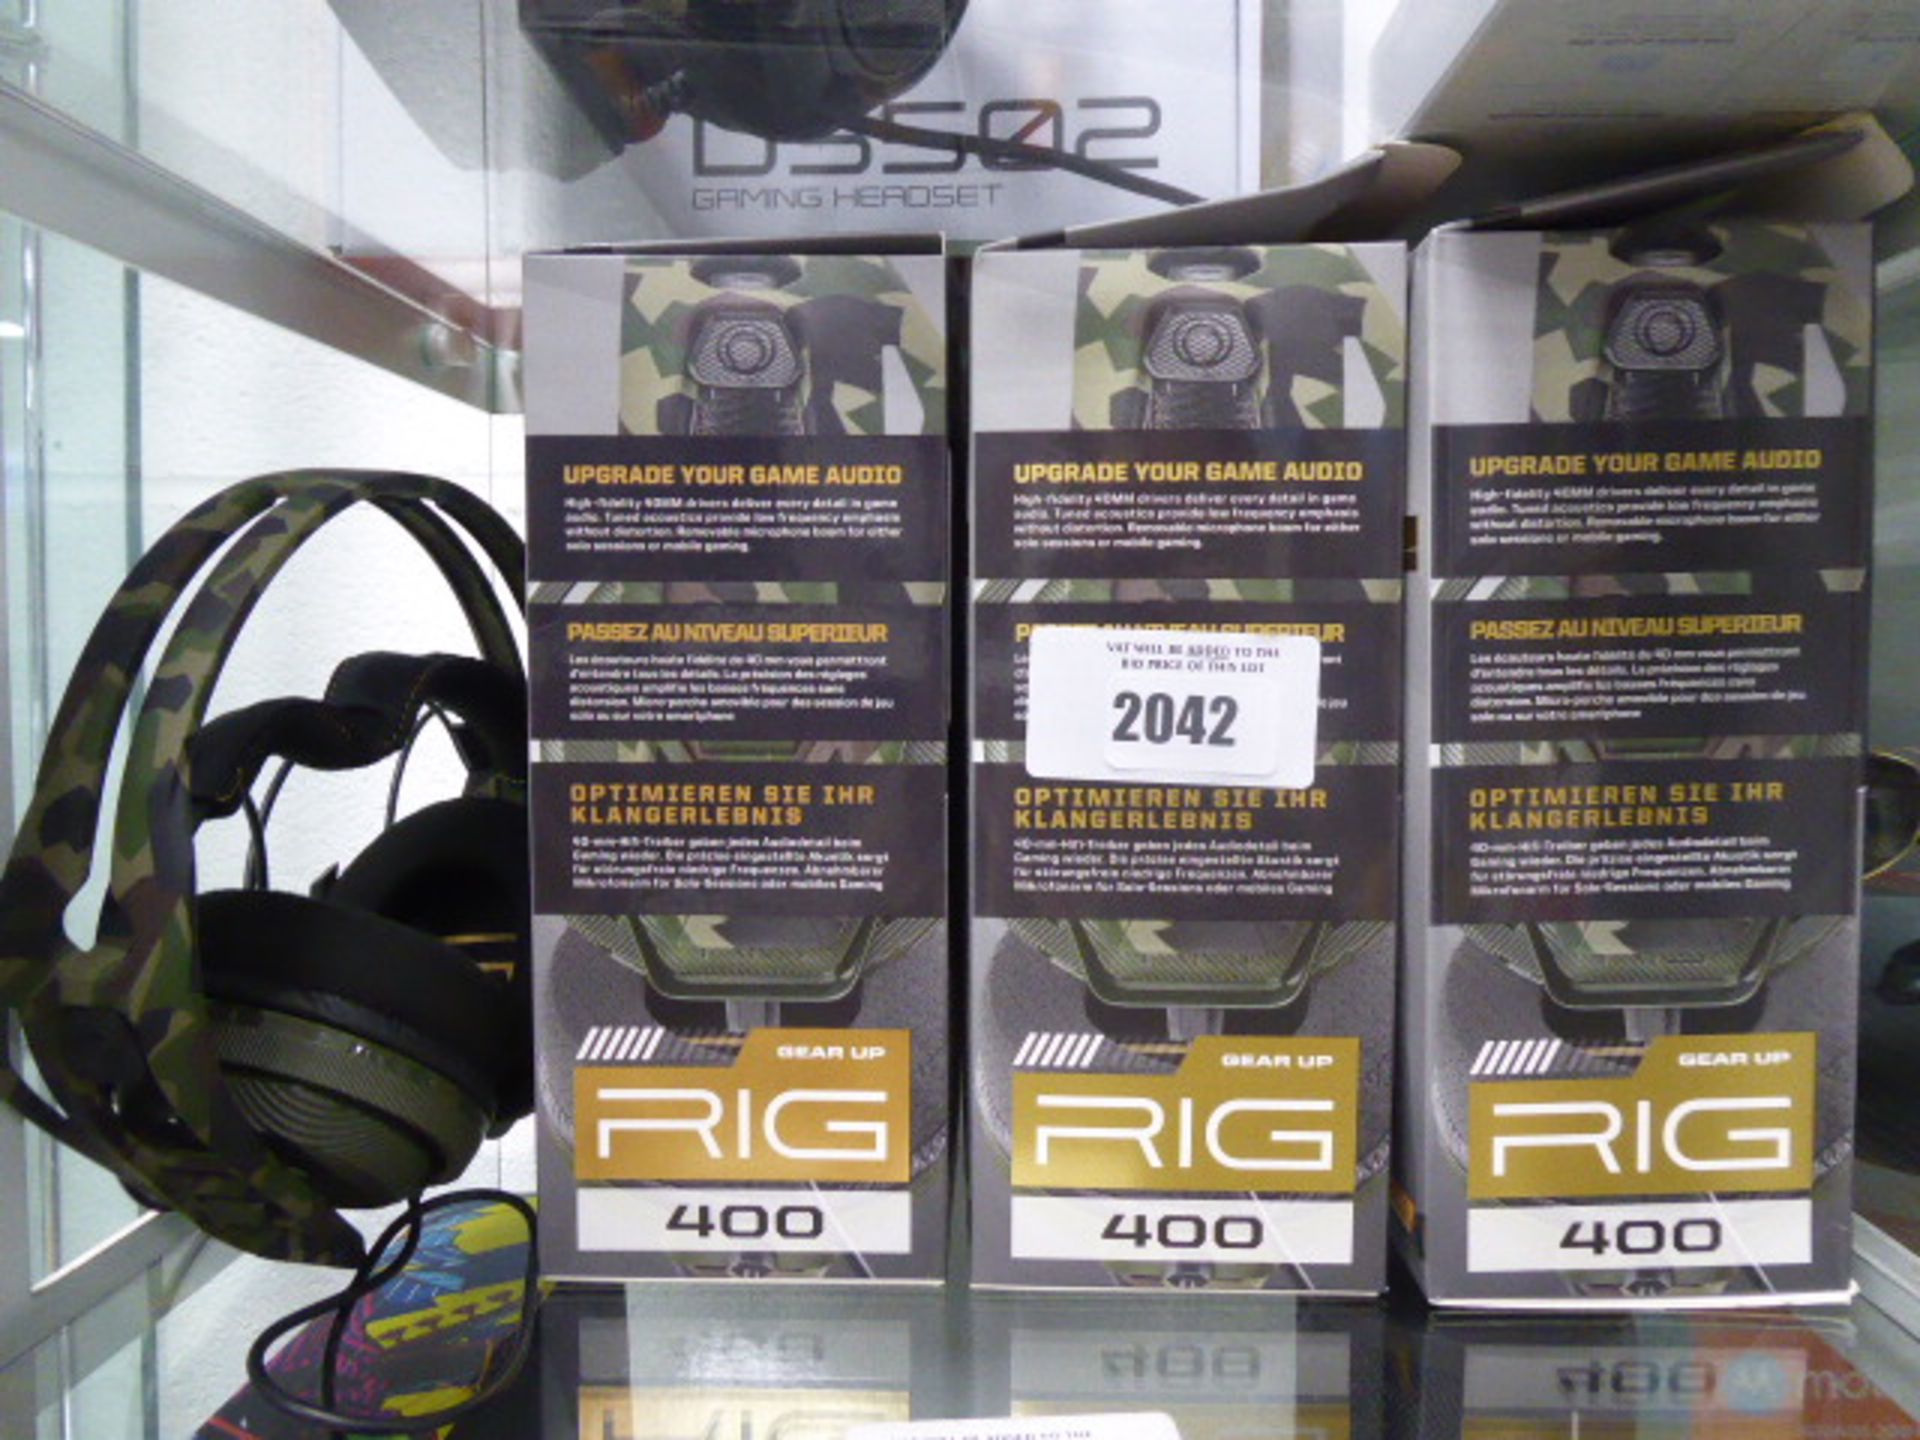 3 boxed and 1 unboxed pair of Rig 400 gaming headsets by Plantronics